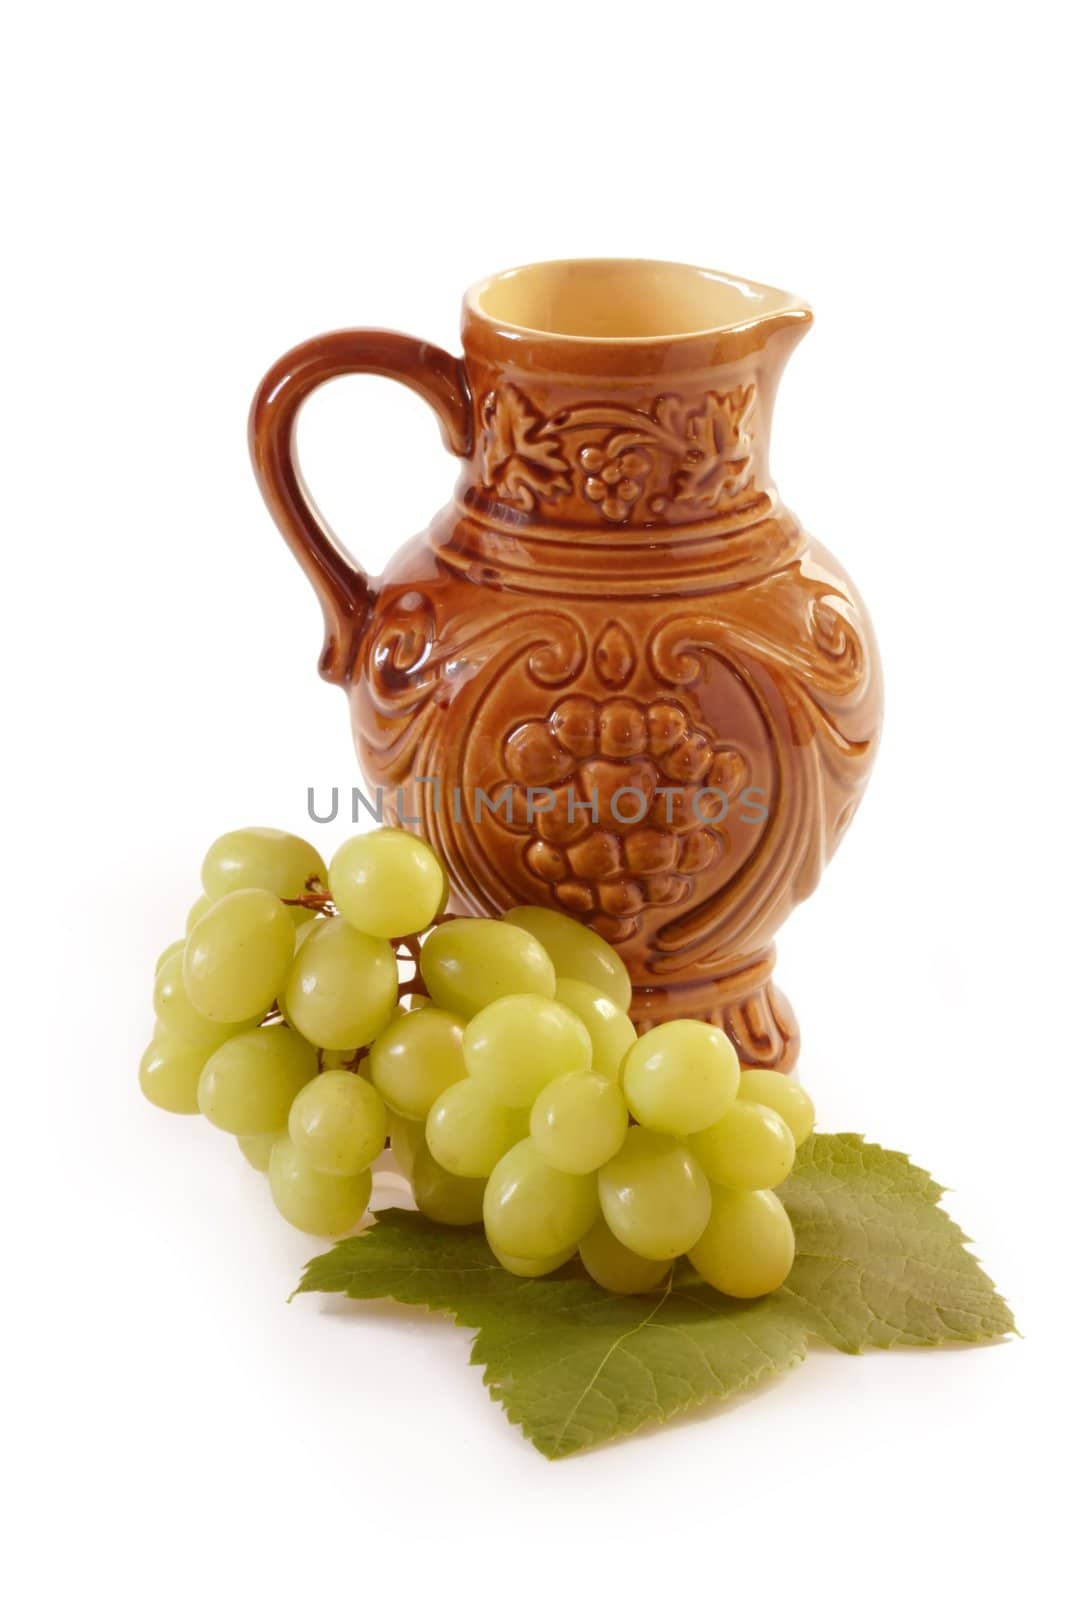 Brown wine jug with grapes on white background